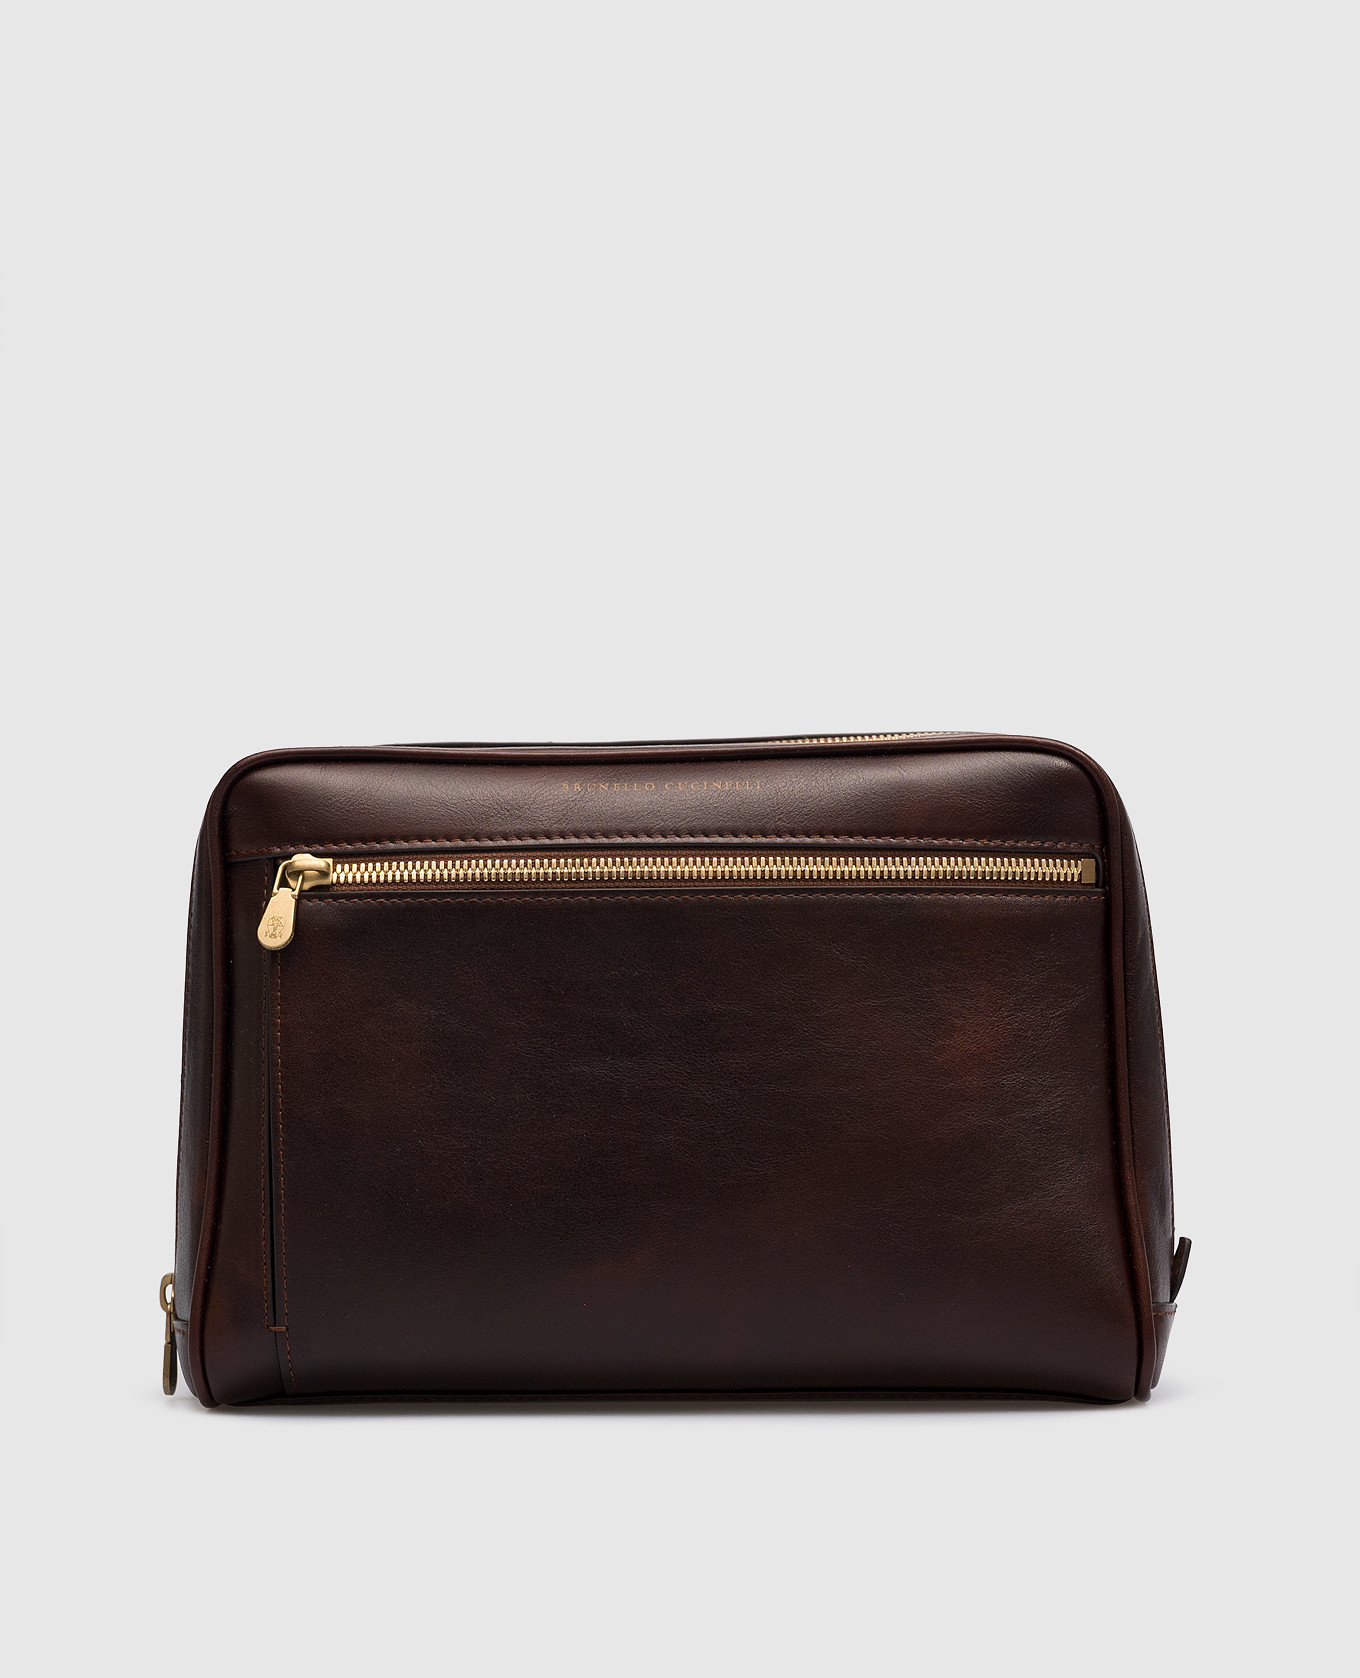 Brown leather toiletry bag with embossed logo